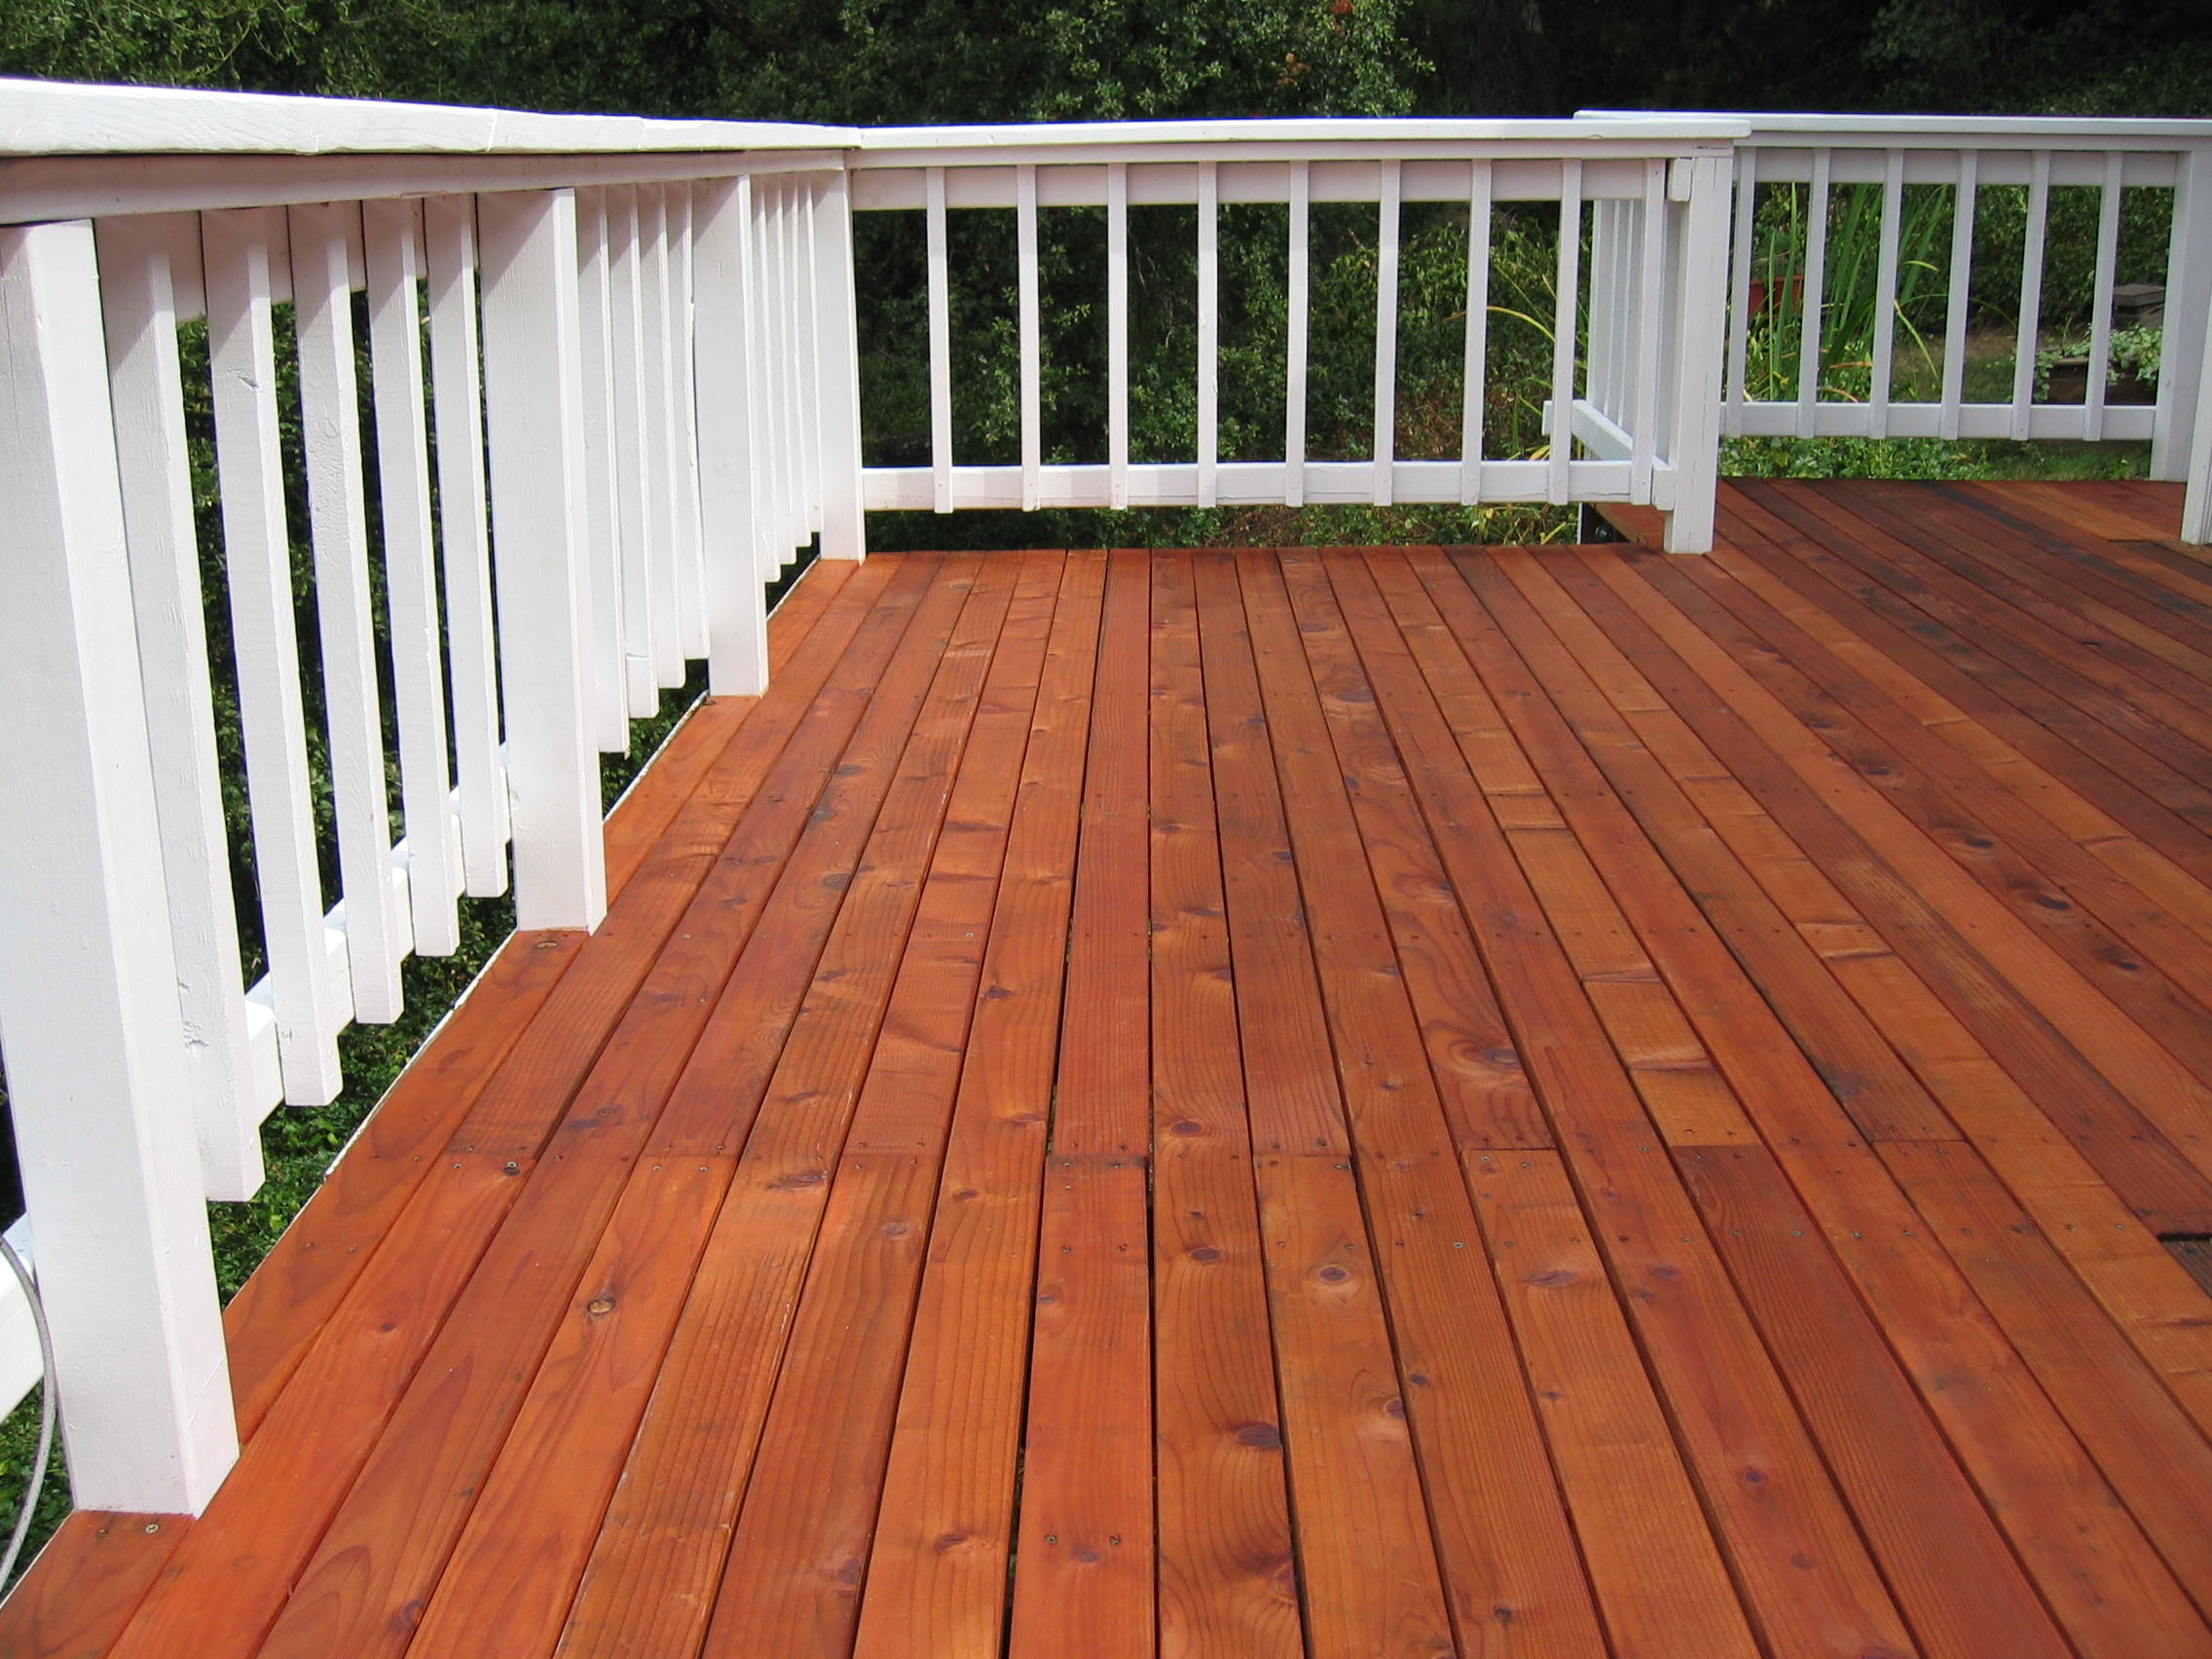 Deck Refinishing Sandedstained Sealed Cjo Maintenance throughout size 2272 X 1704